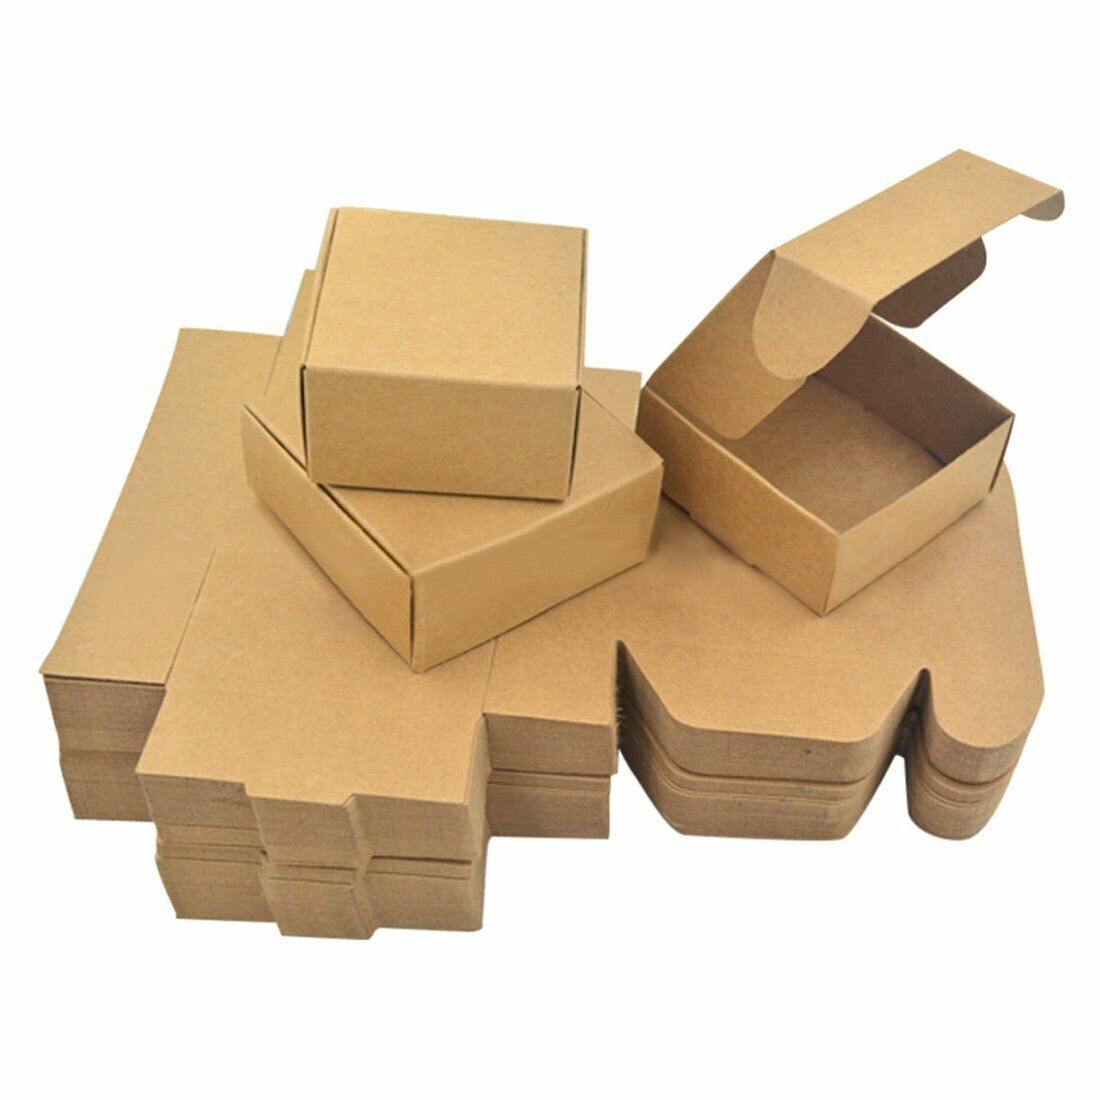 An in-detail Guide to Getting Quality Kraft Mailer Boxes